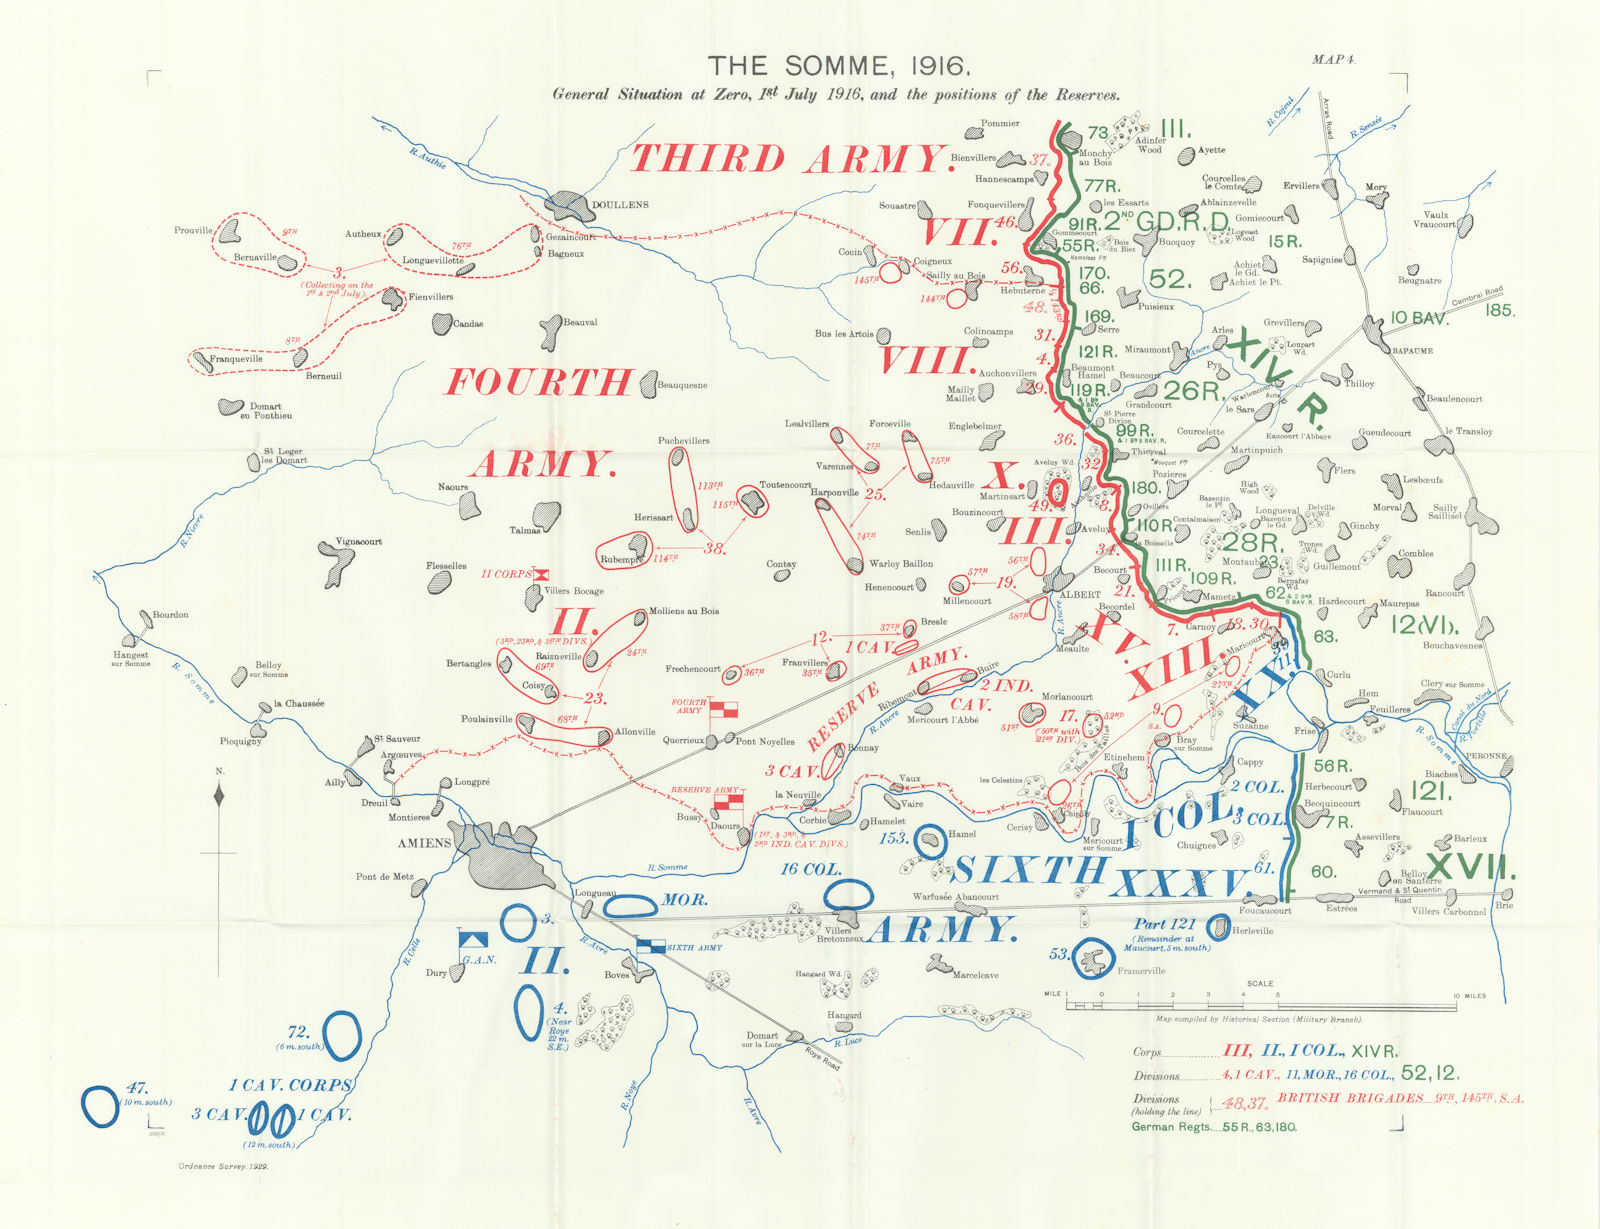 Somme, 1916. Situation at Zero, 1st July 1916 & Reserve positions 1932 old map